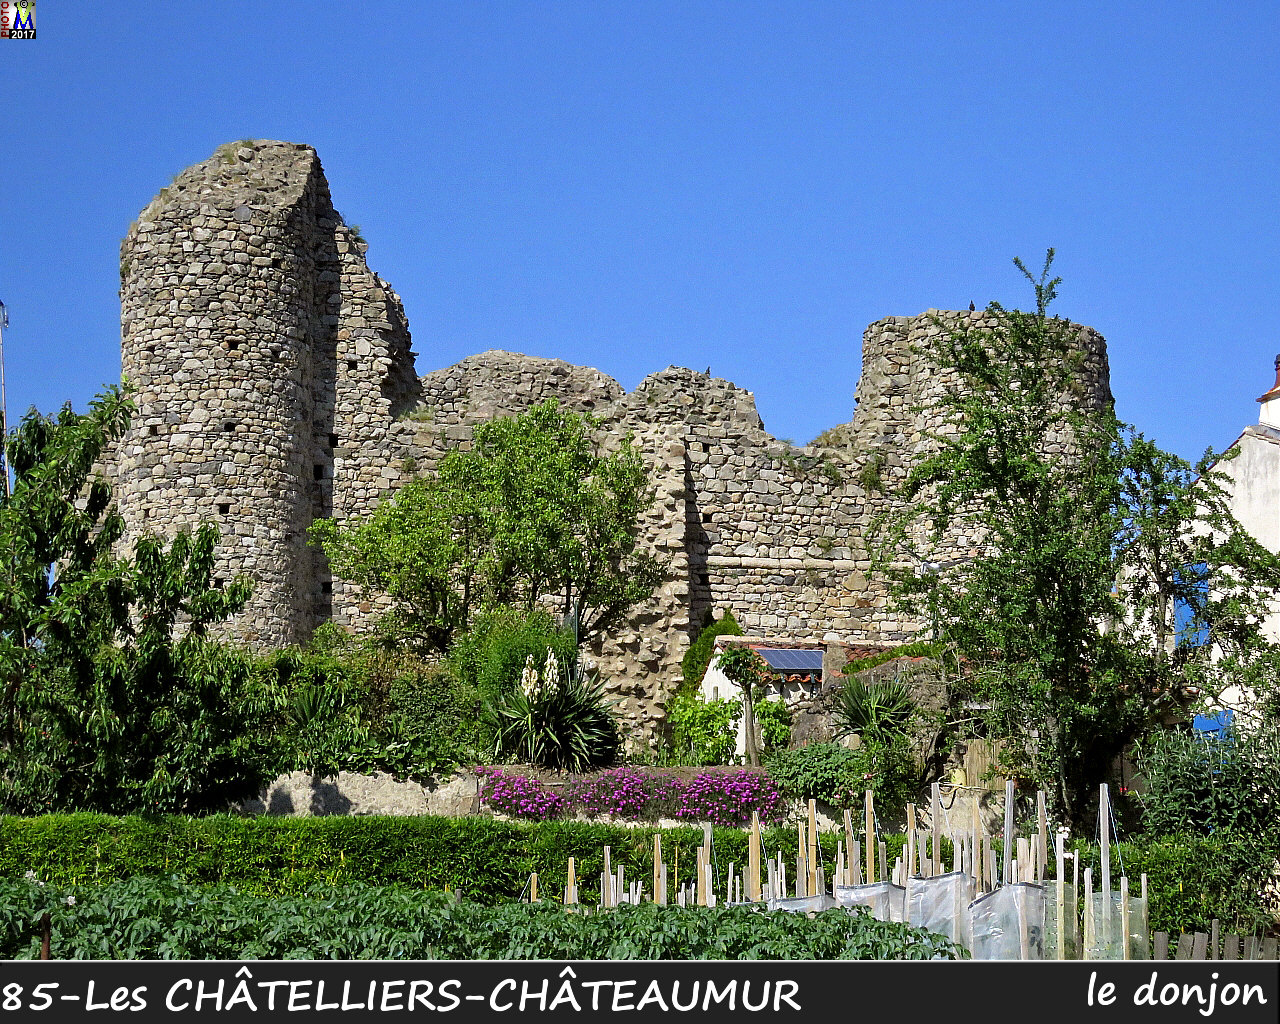 85CHATELLIERS-CHATEAUMUR_chateau_1008.jpg